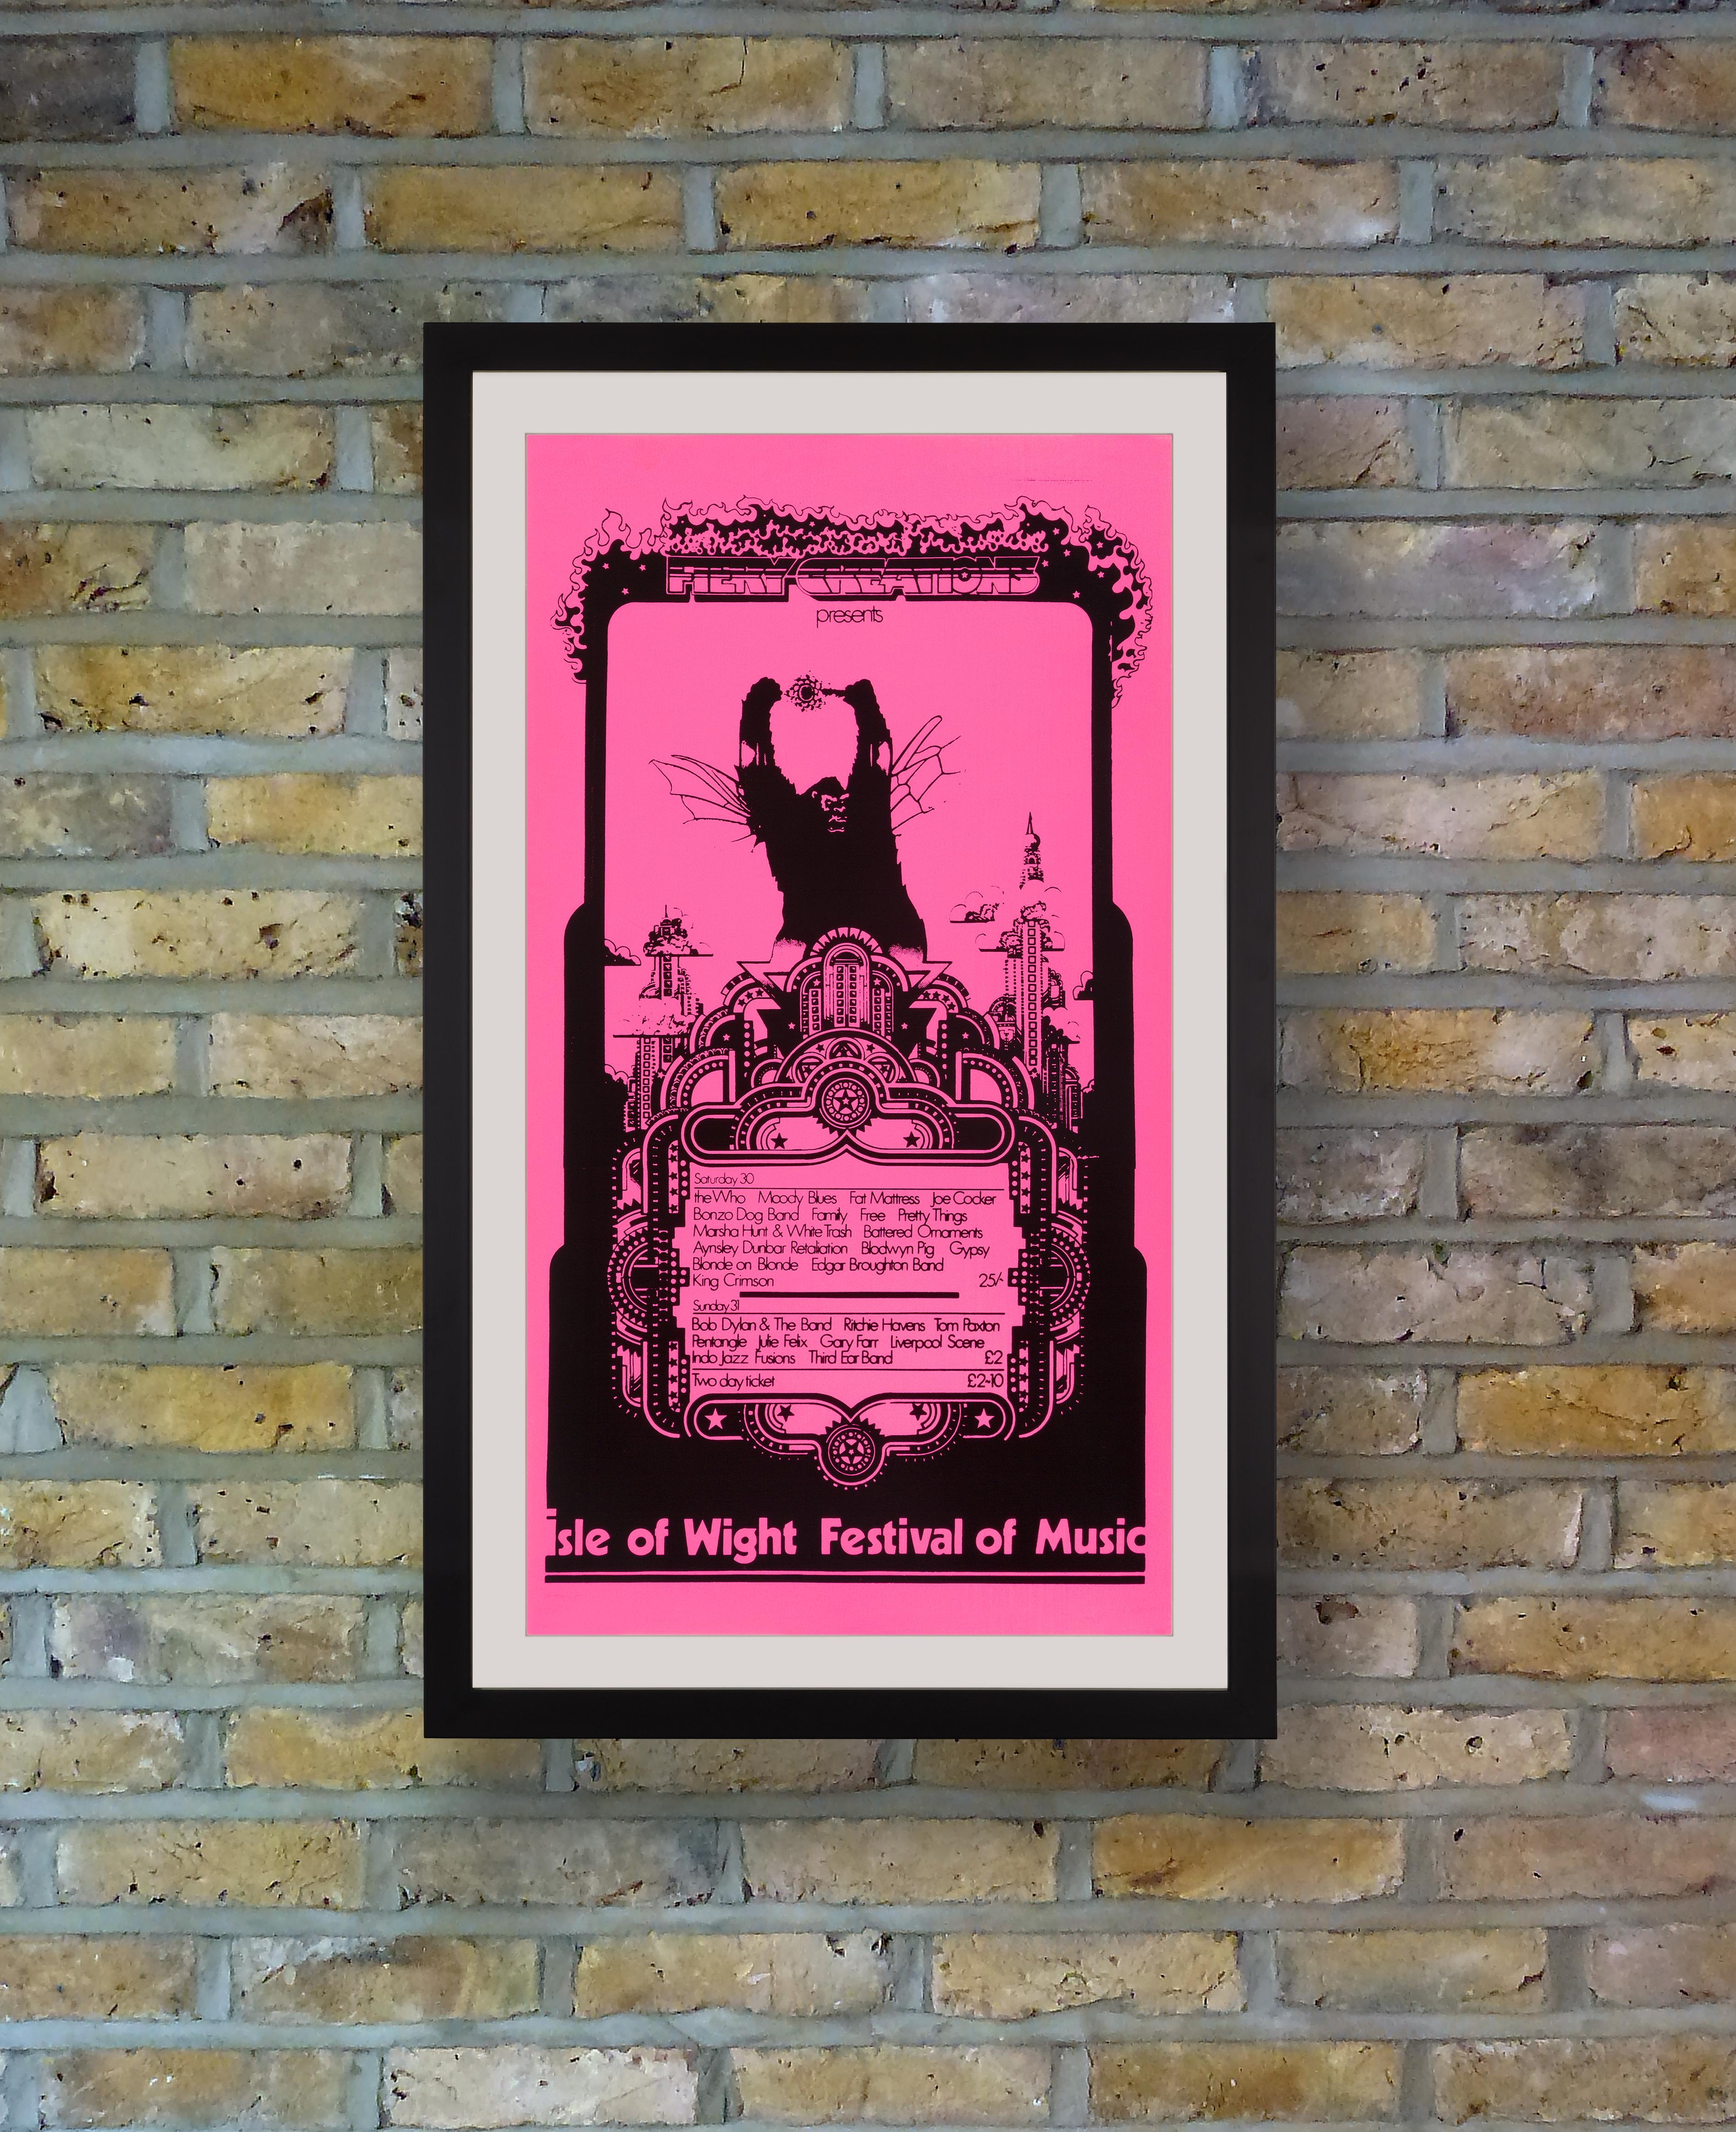 A shocking day-glo pink poster by Liverpudlian artist David Fairbrother-Roe for the UK's 1969 Isle of Wight Festival. Just 11 days after Woodstock, over 150,000 peace-loving revellers from all over the world descended on the Isle of Wight on 29